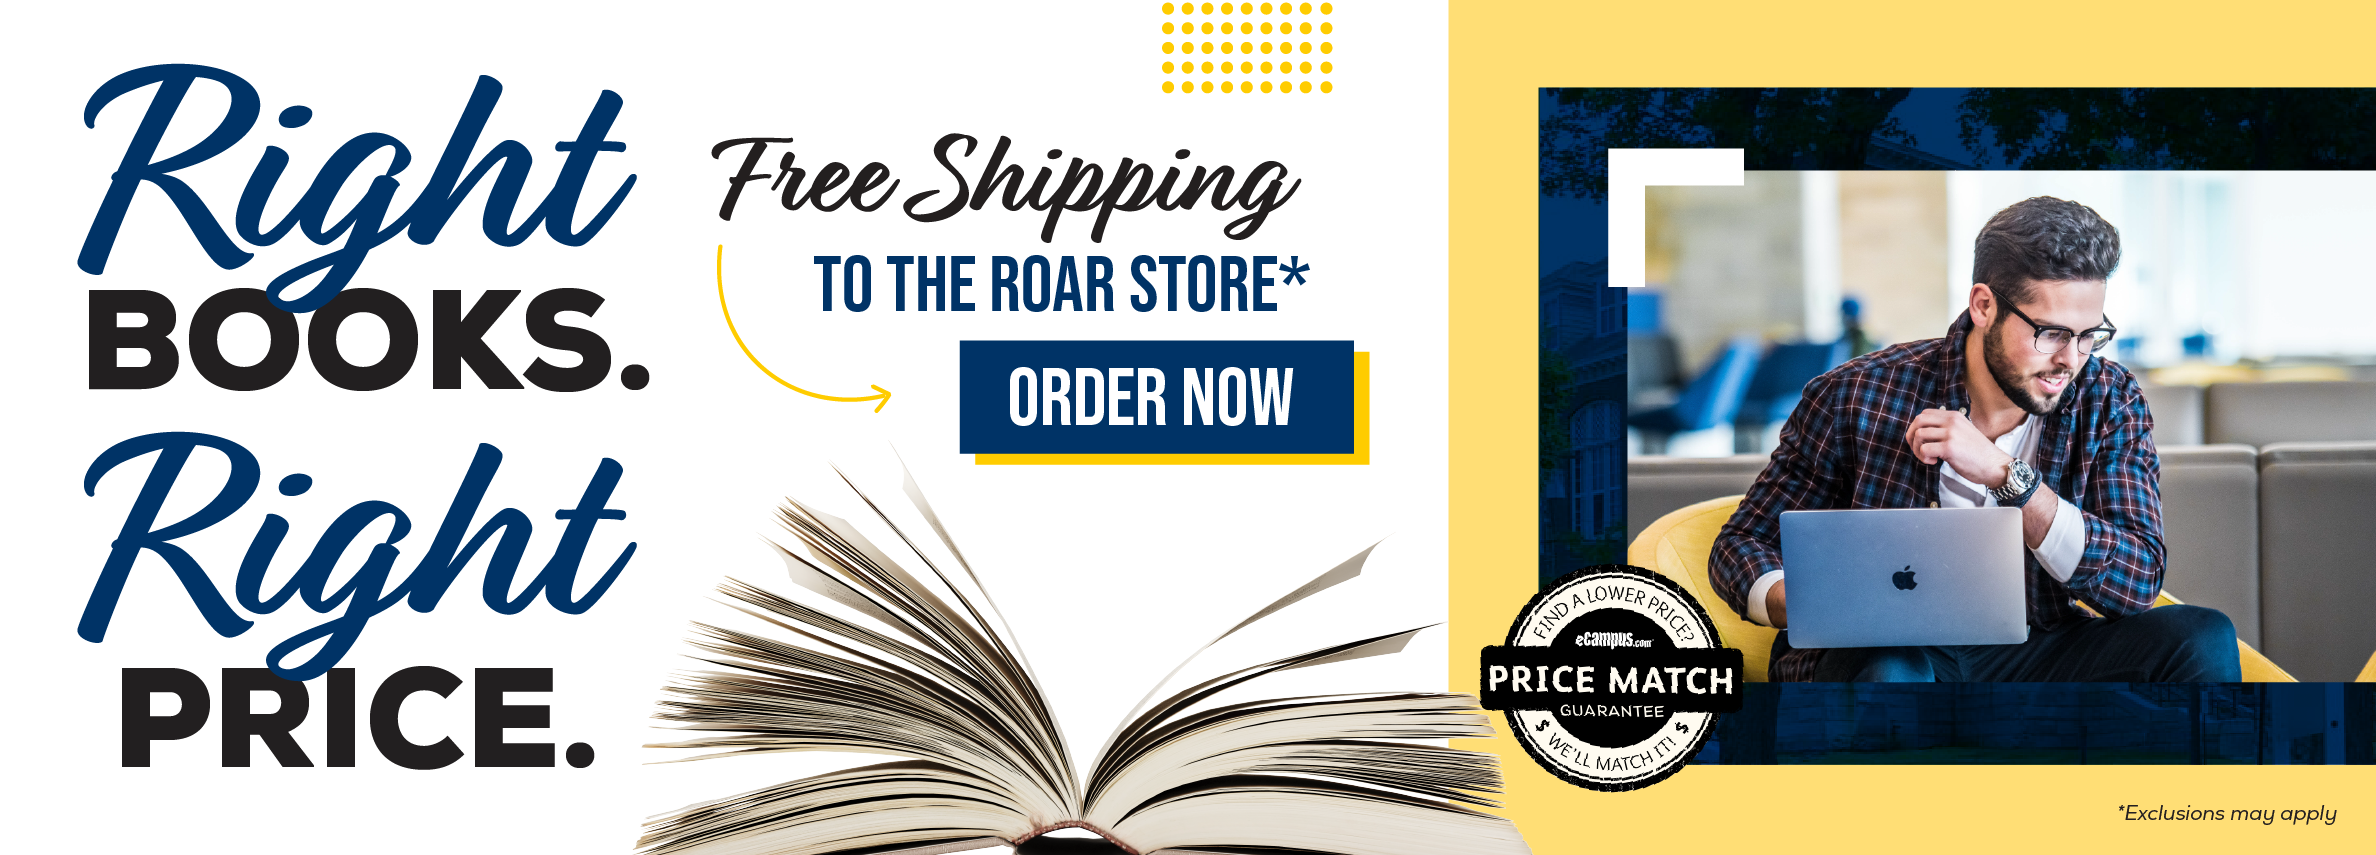 Right books. Right price. Free shipping to the Roar Store.* Order now. Price Match Guarantee. *Exclusions may apply.